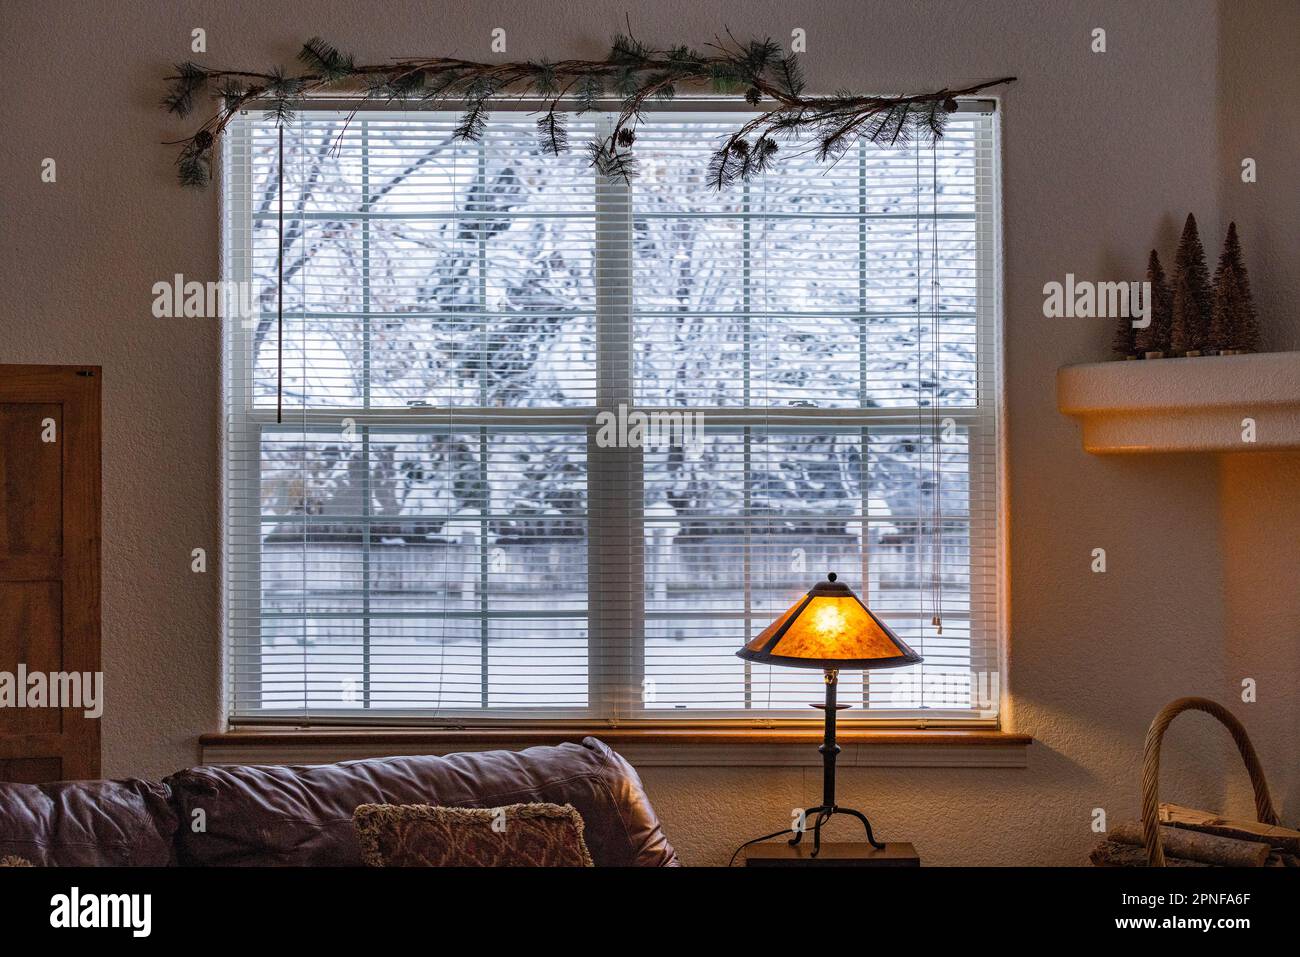 View from living room to snowy outdoors Stock Photo